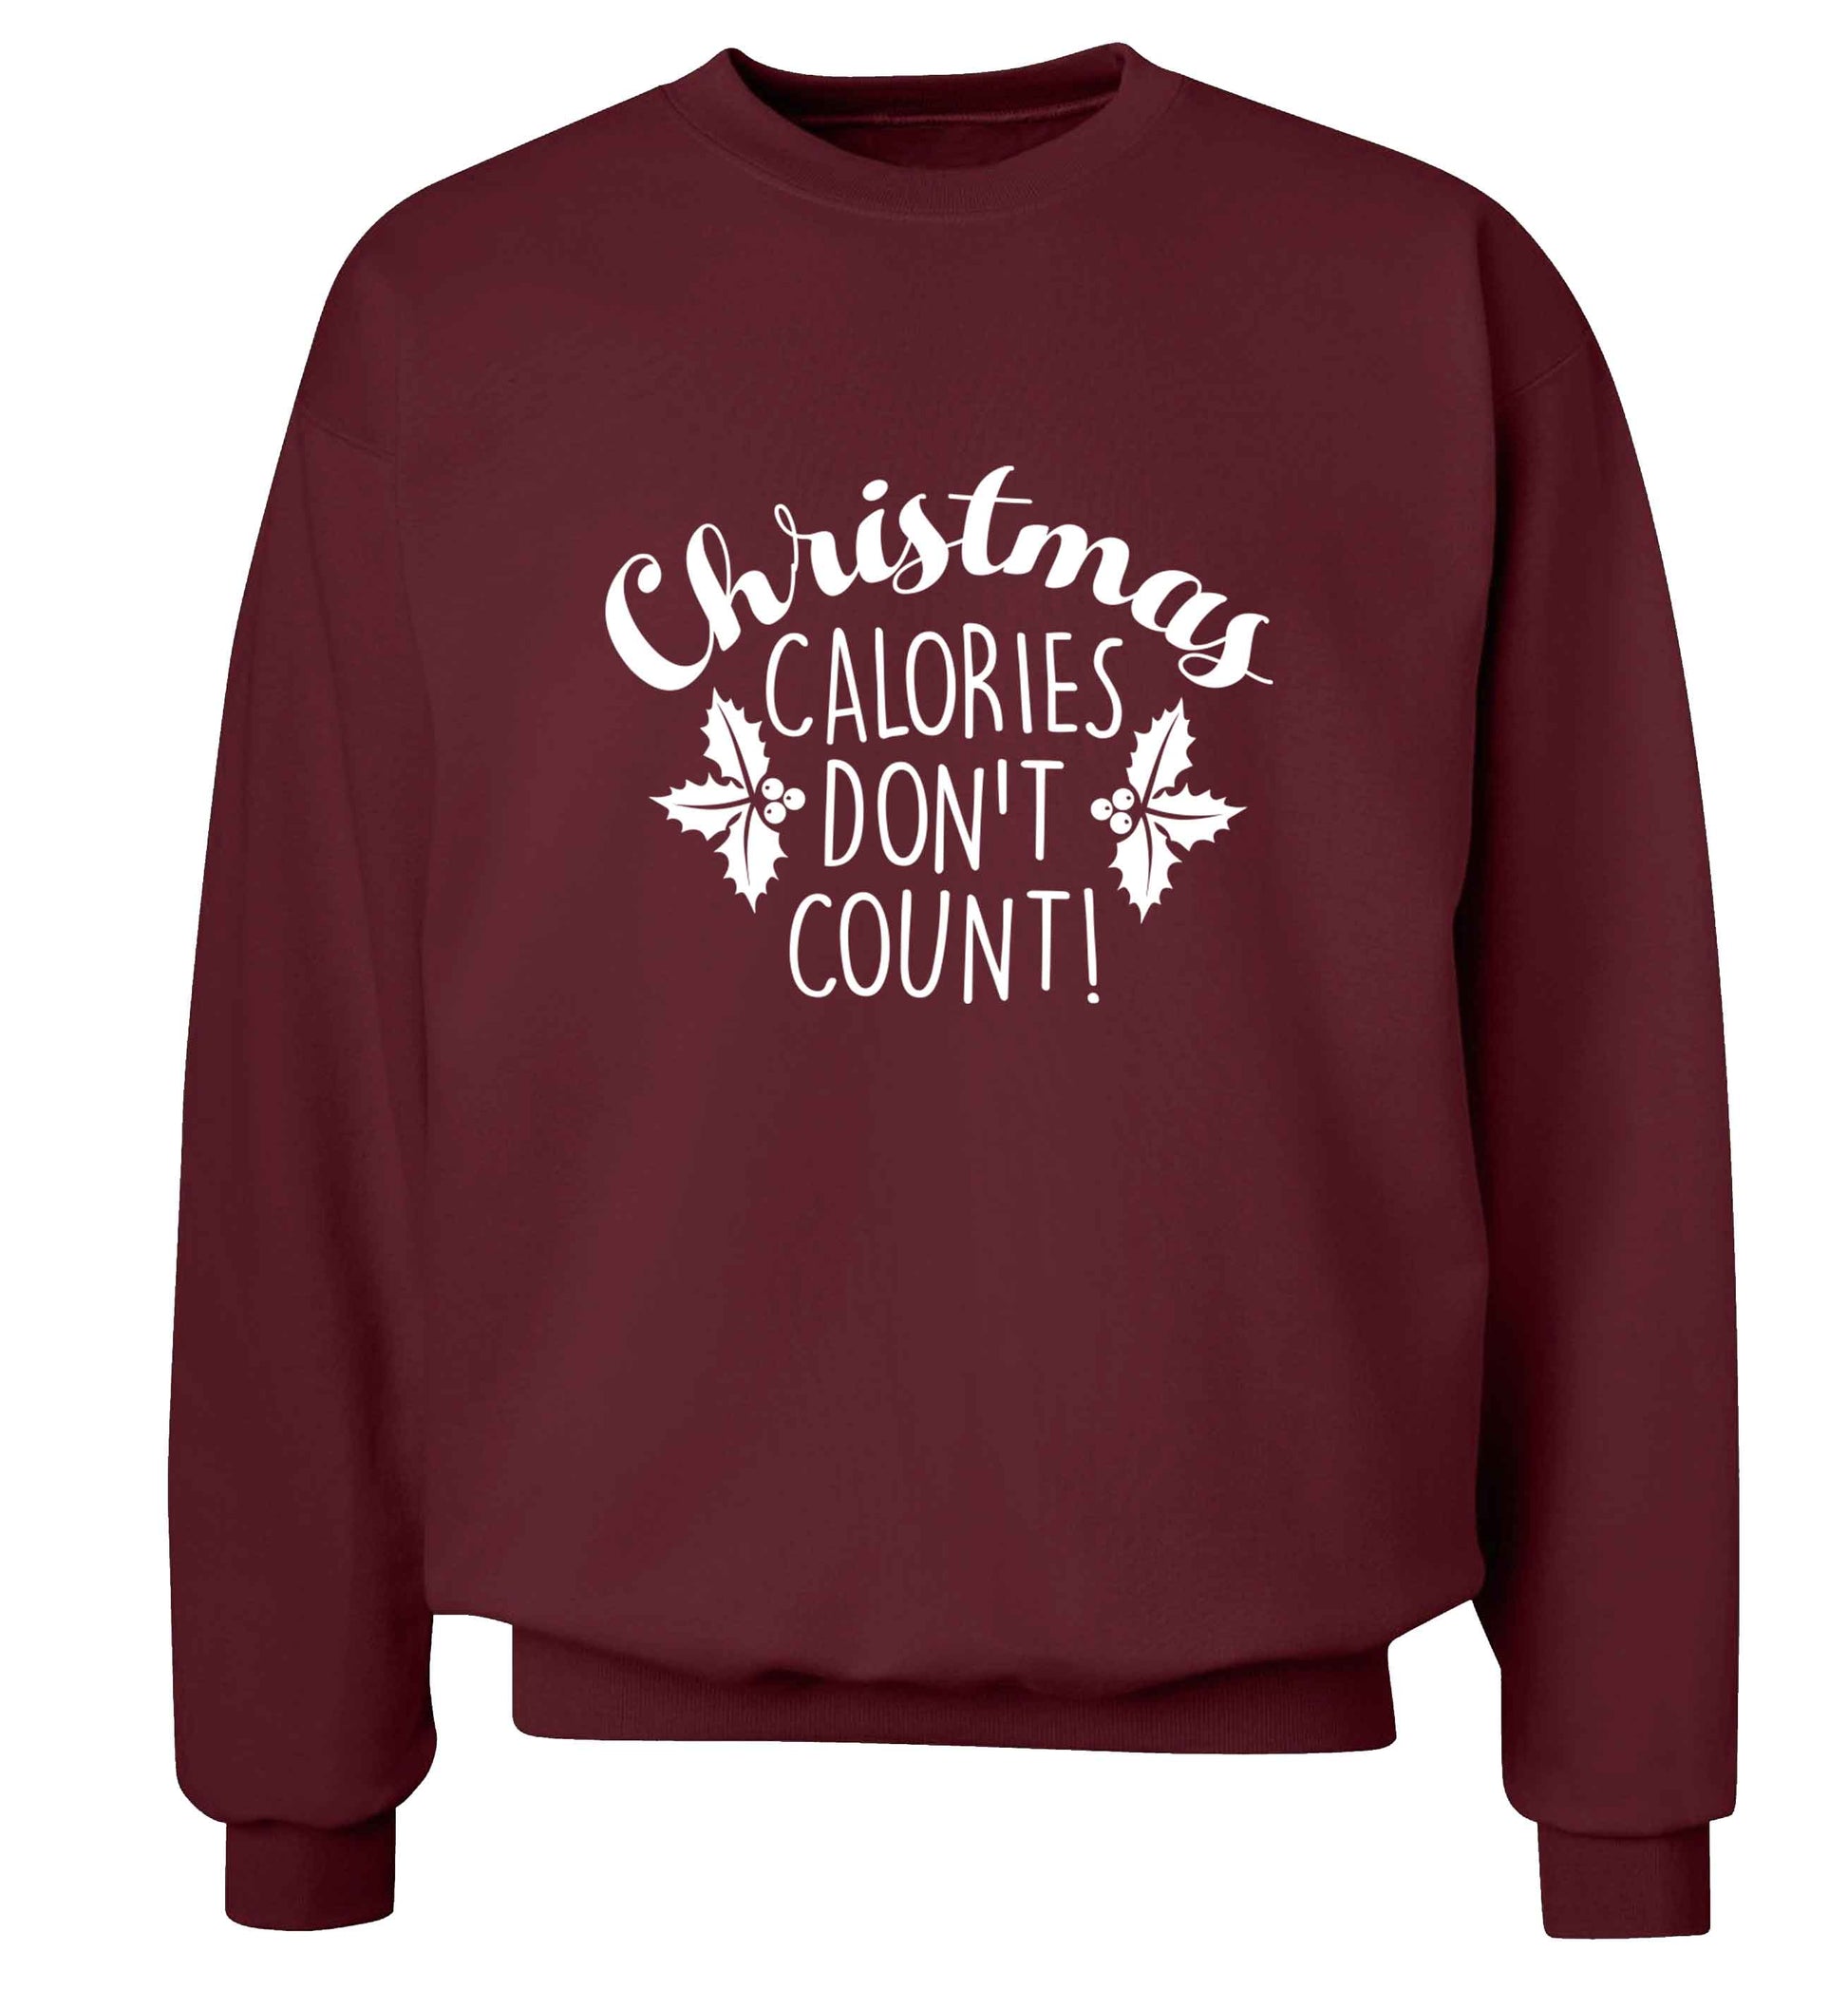 Christmas calories don't count adult's unisex maroon sweater 2XL